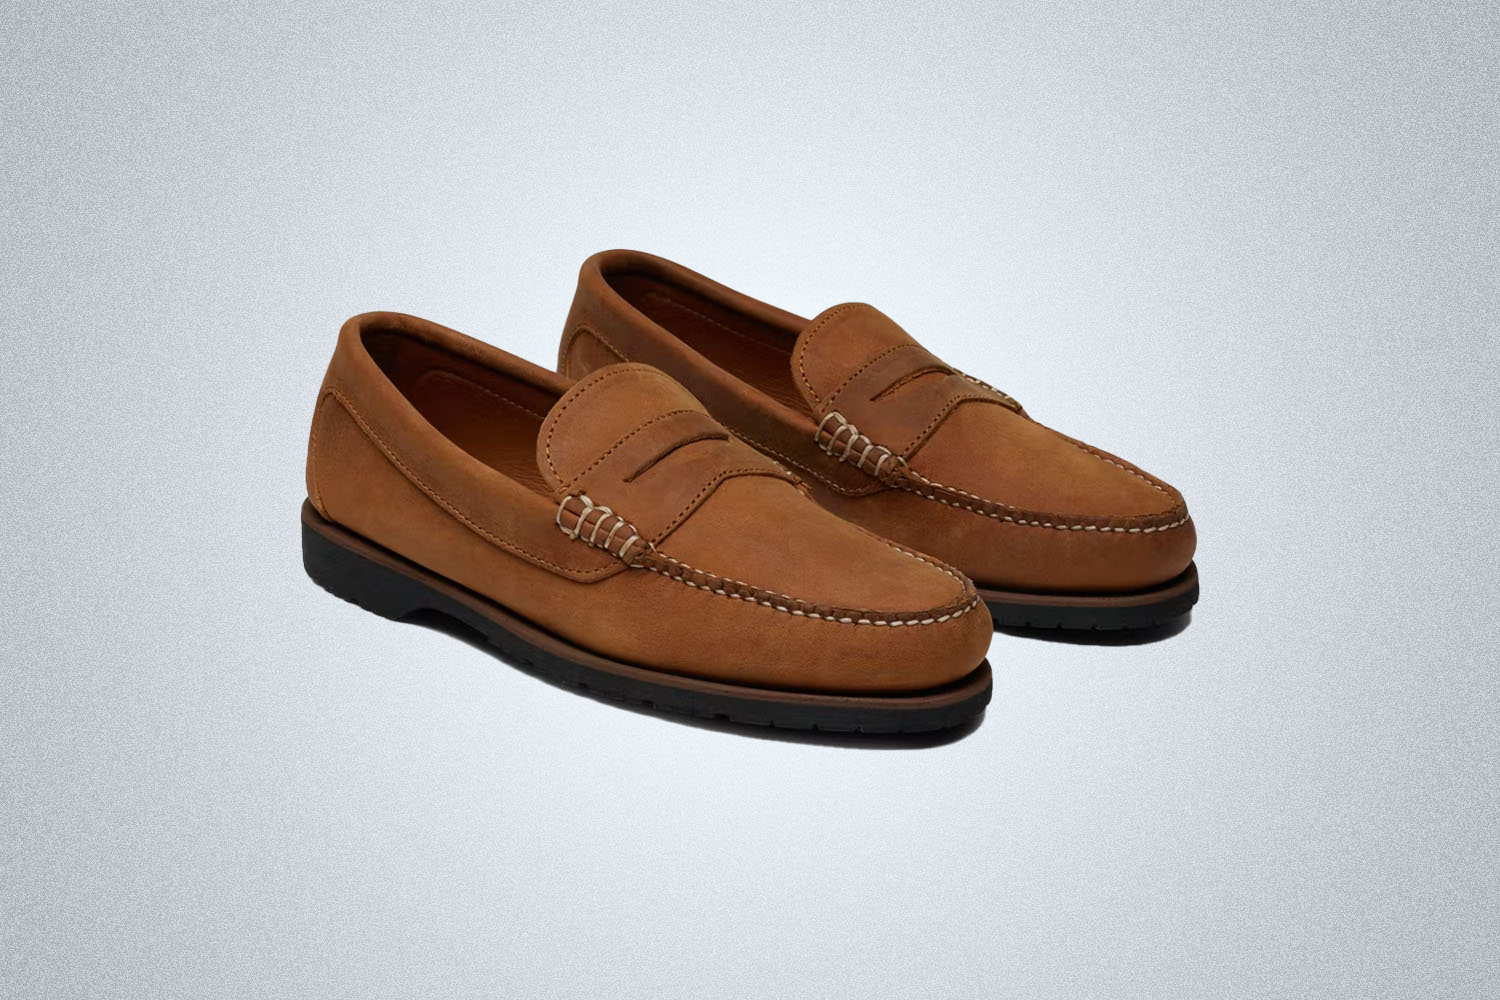 A pair of Summer Loafers from Quoddy on a grey background